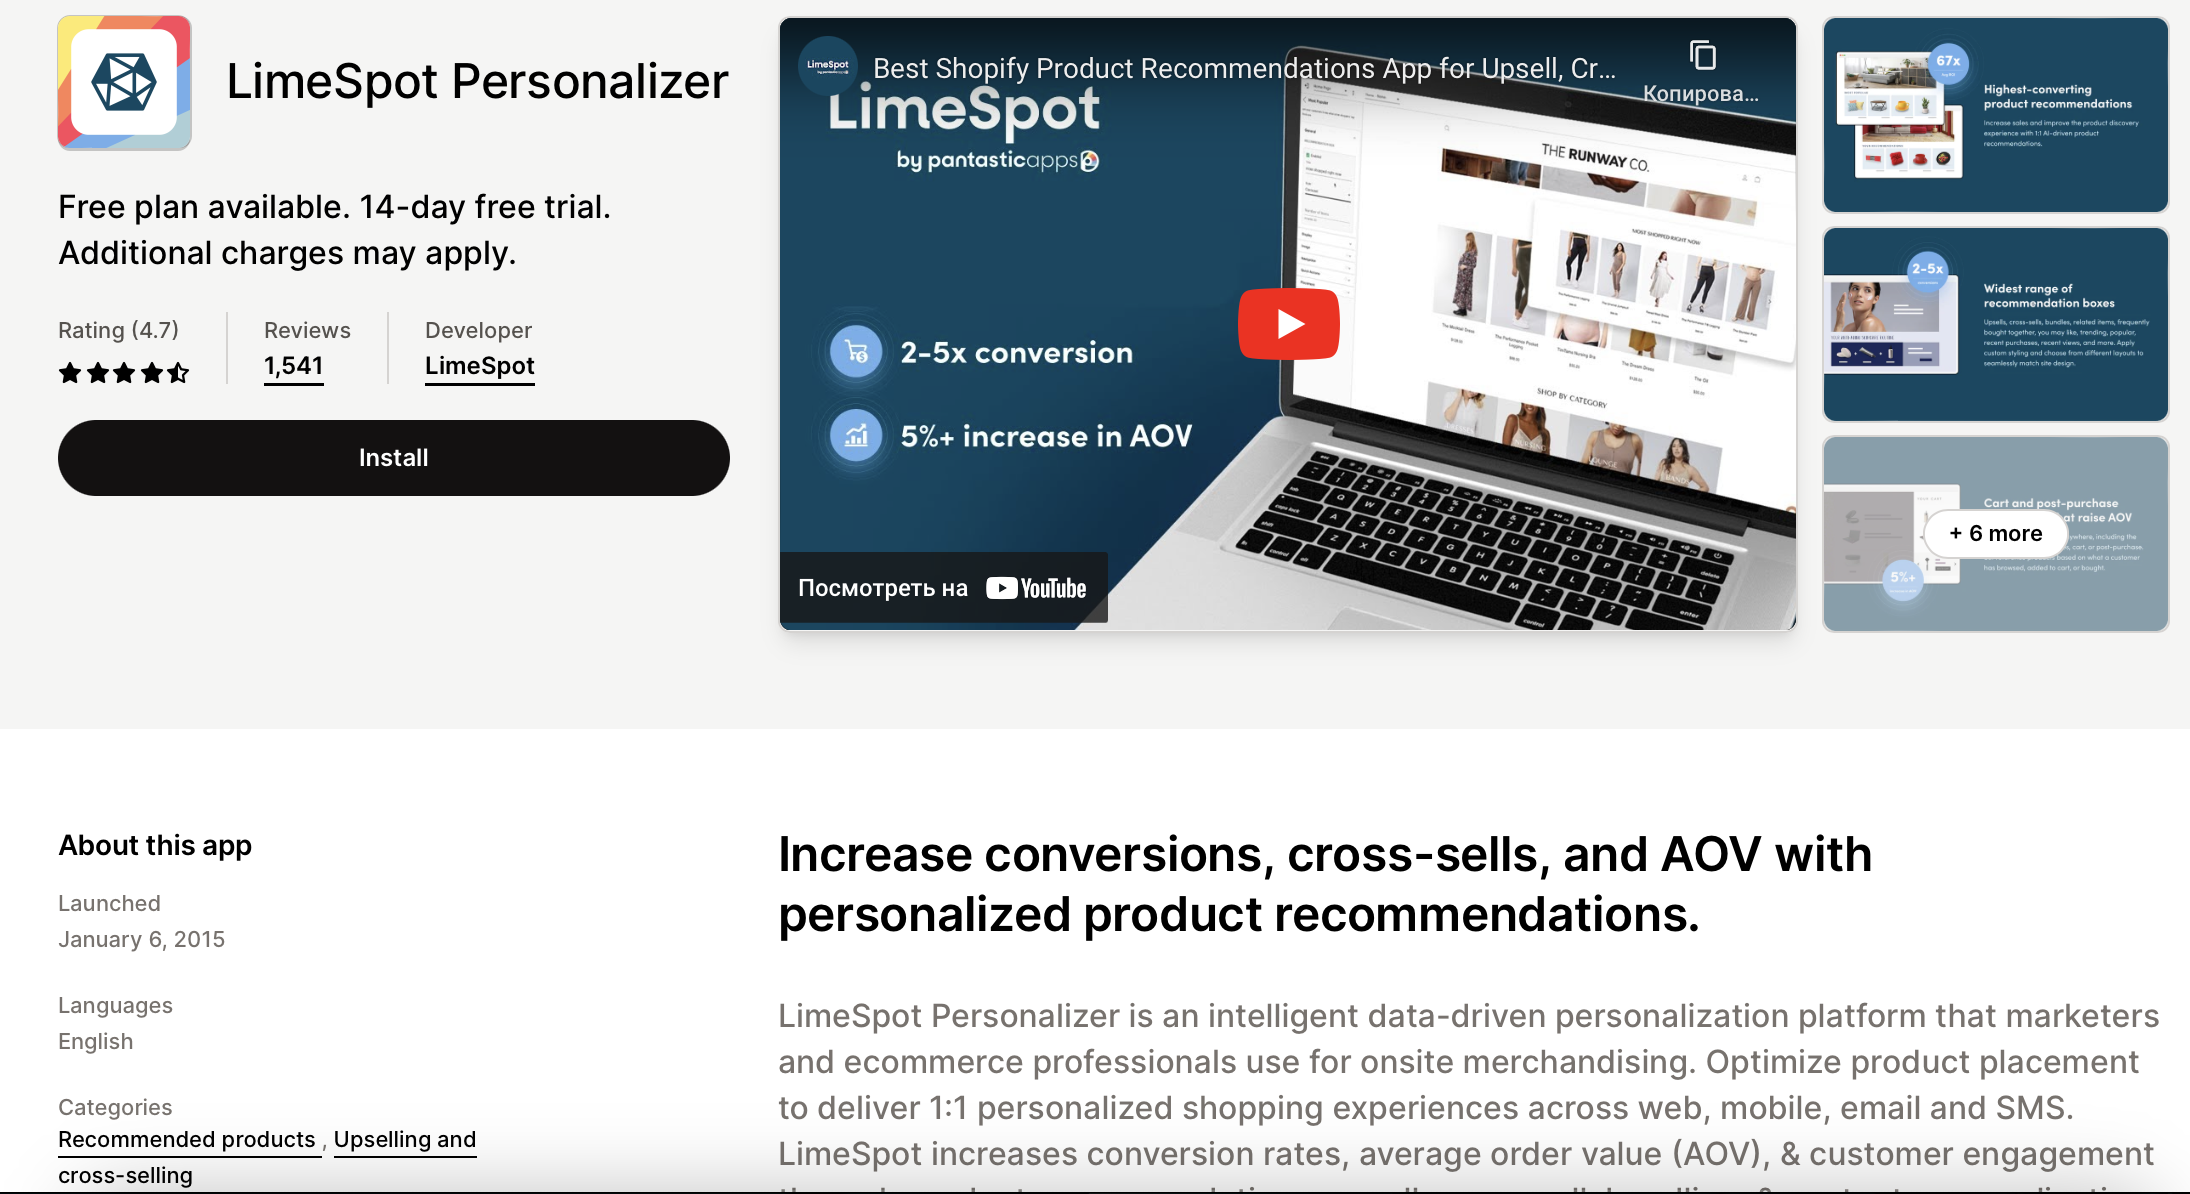 LimeSpot Personalizer Shopify app (best bundle apps for shopify)